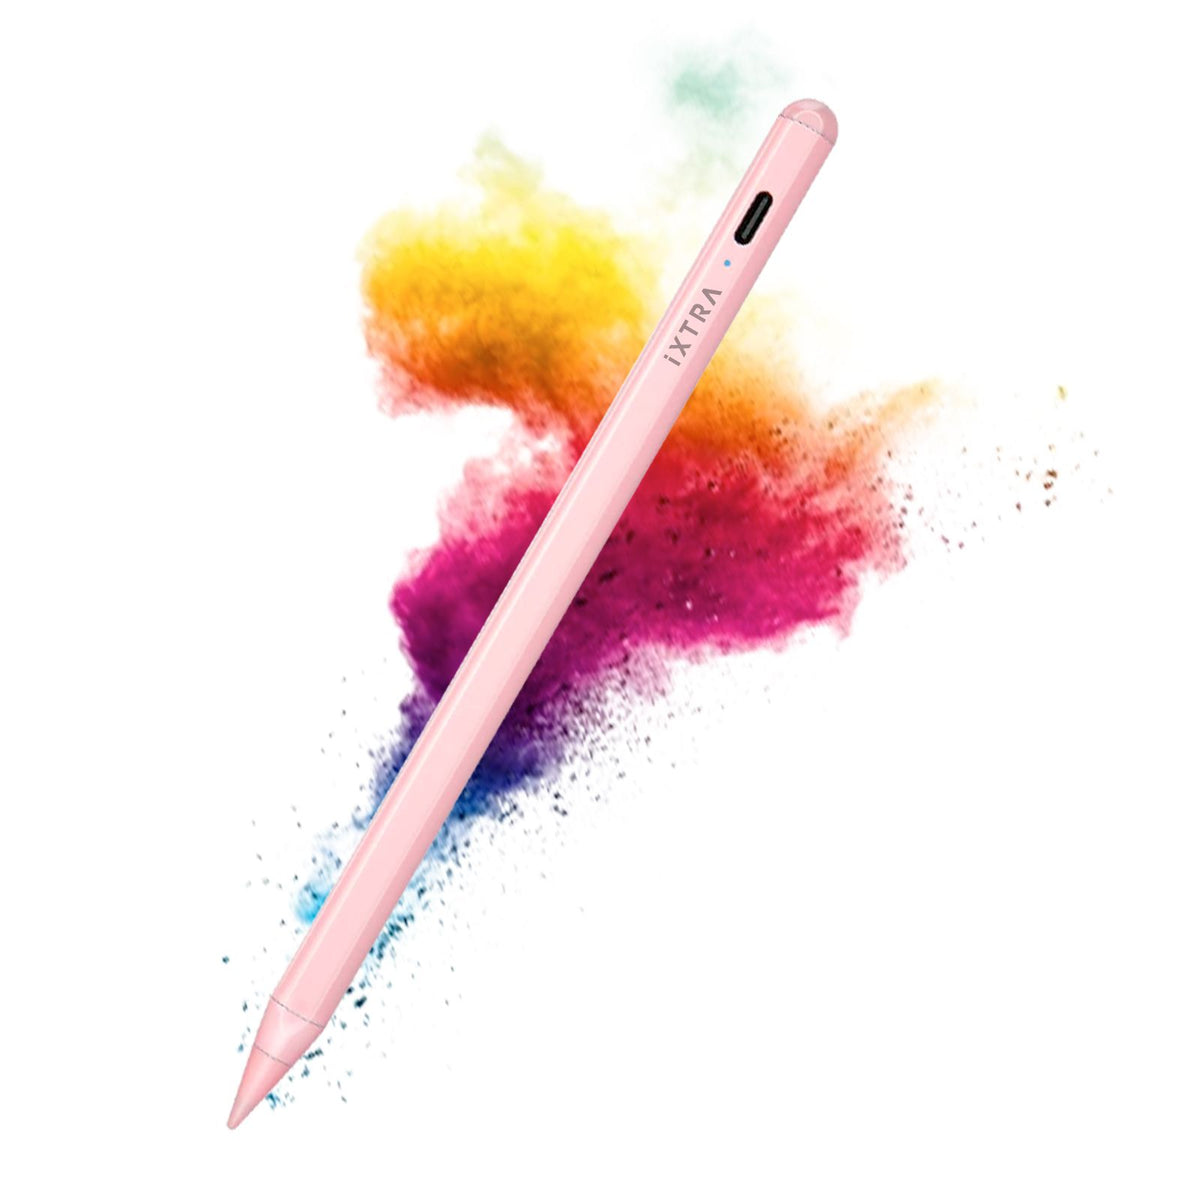 Capacitive Stylus Pen for iPad with Palm Rejection – iXTRA